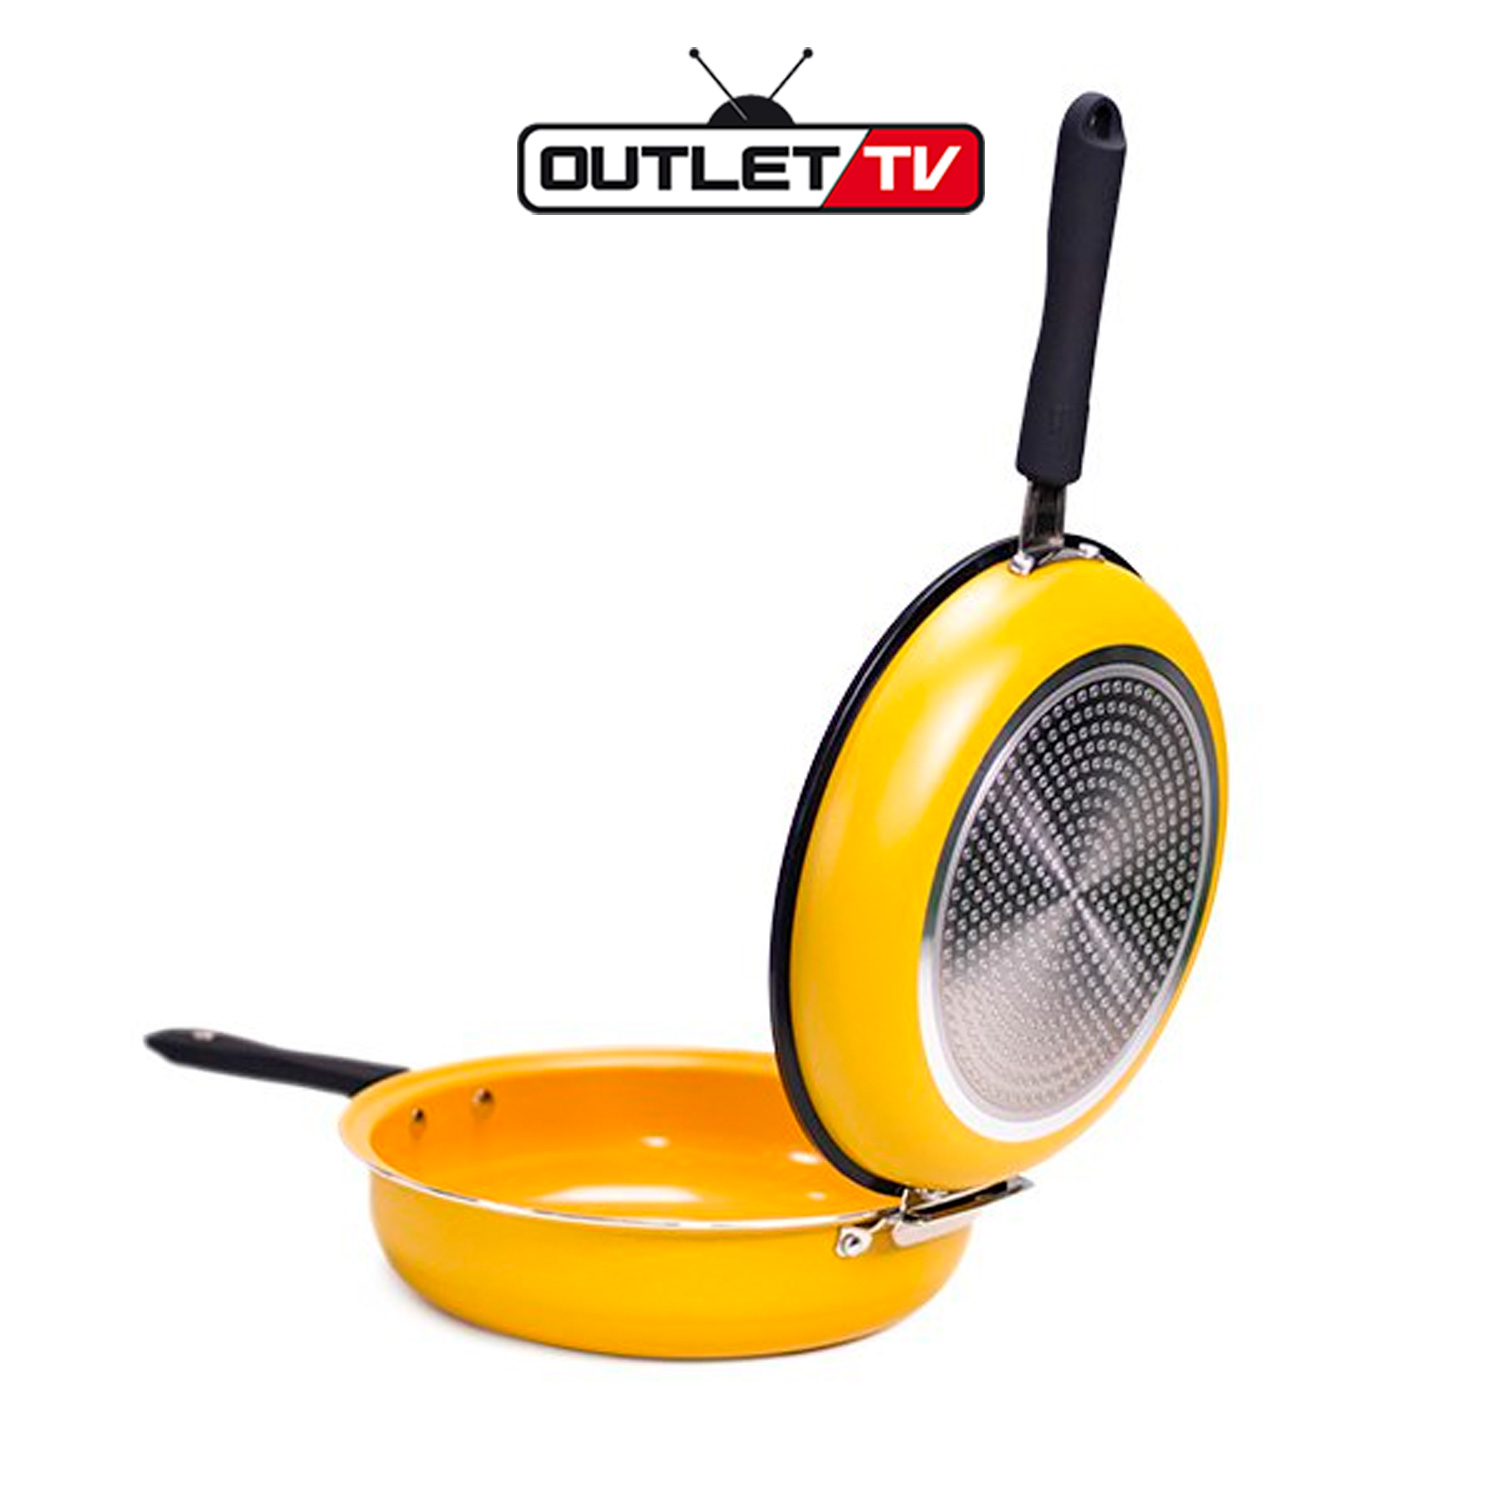 https://outlettv.com.co/wp-content/uploads/Sart%C3%A9n-Doble-Deluxe-Multifuncional-Antiadherente-Amarillo-Outlet-TV-Colombia_02.jpg